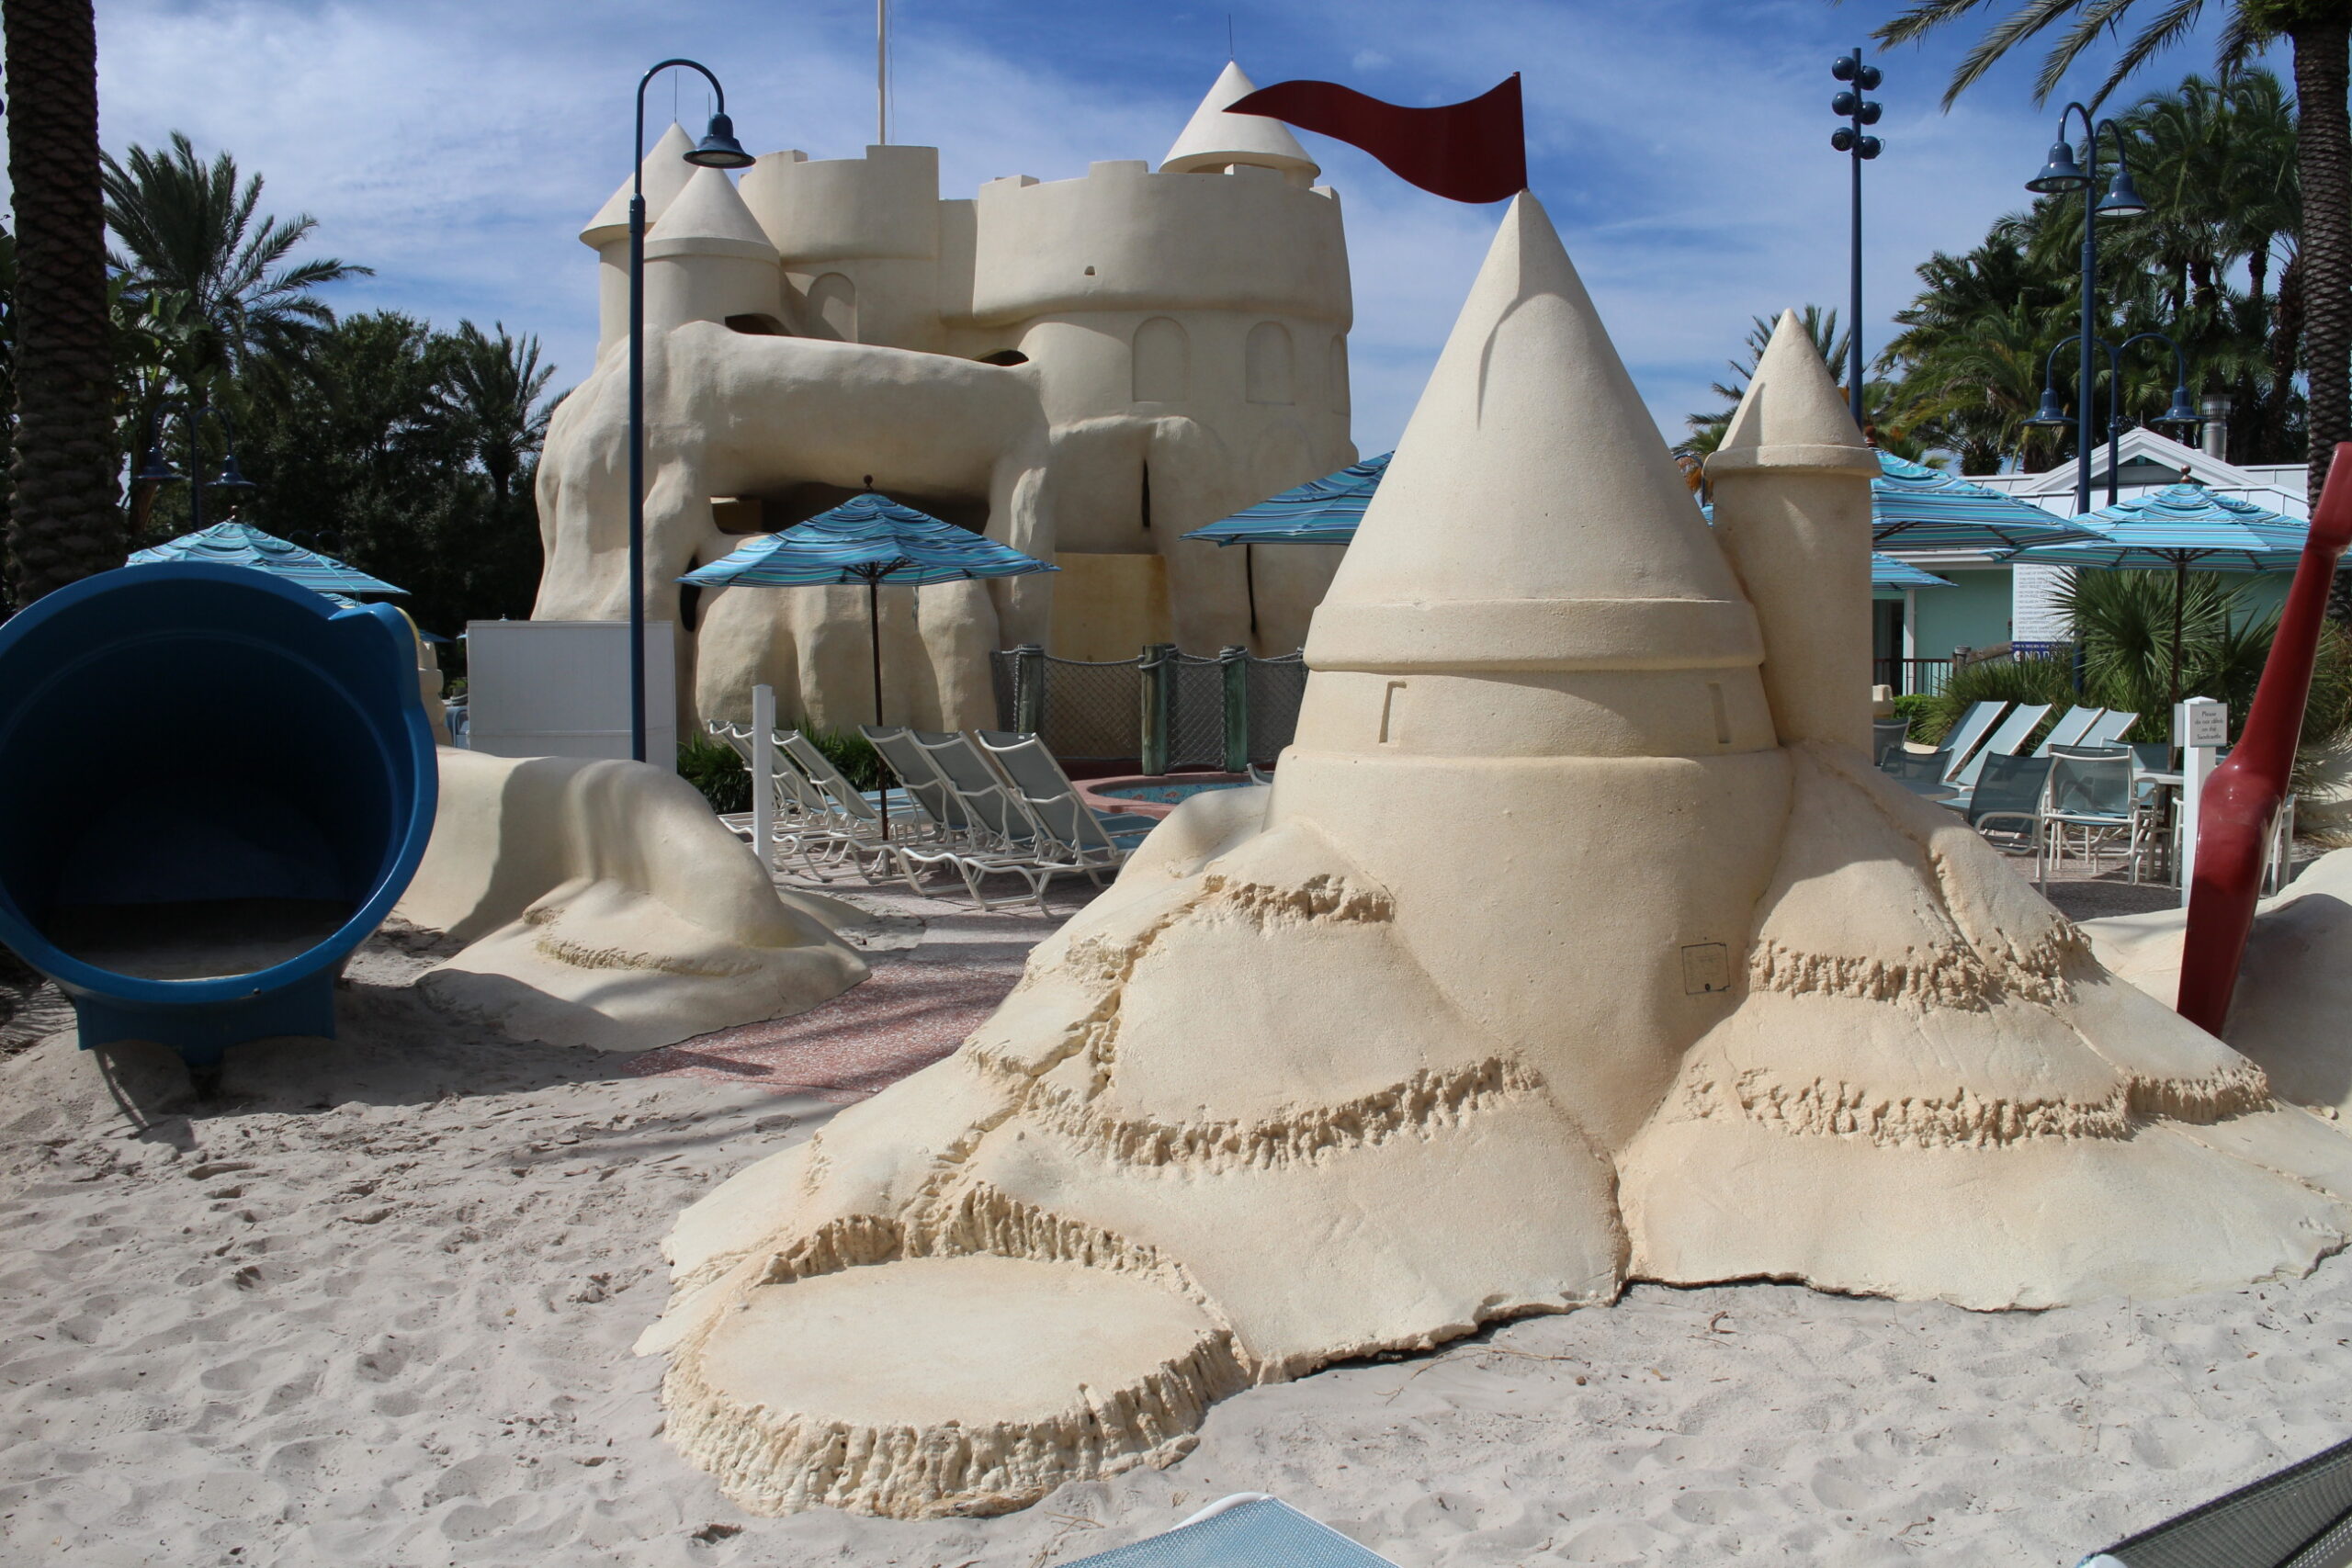 A sand castle playground statue at Disney Vacation Club resort Old Key West